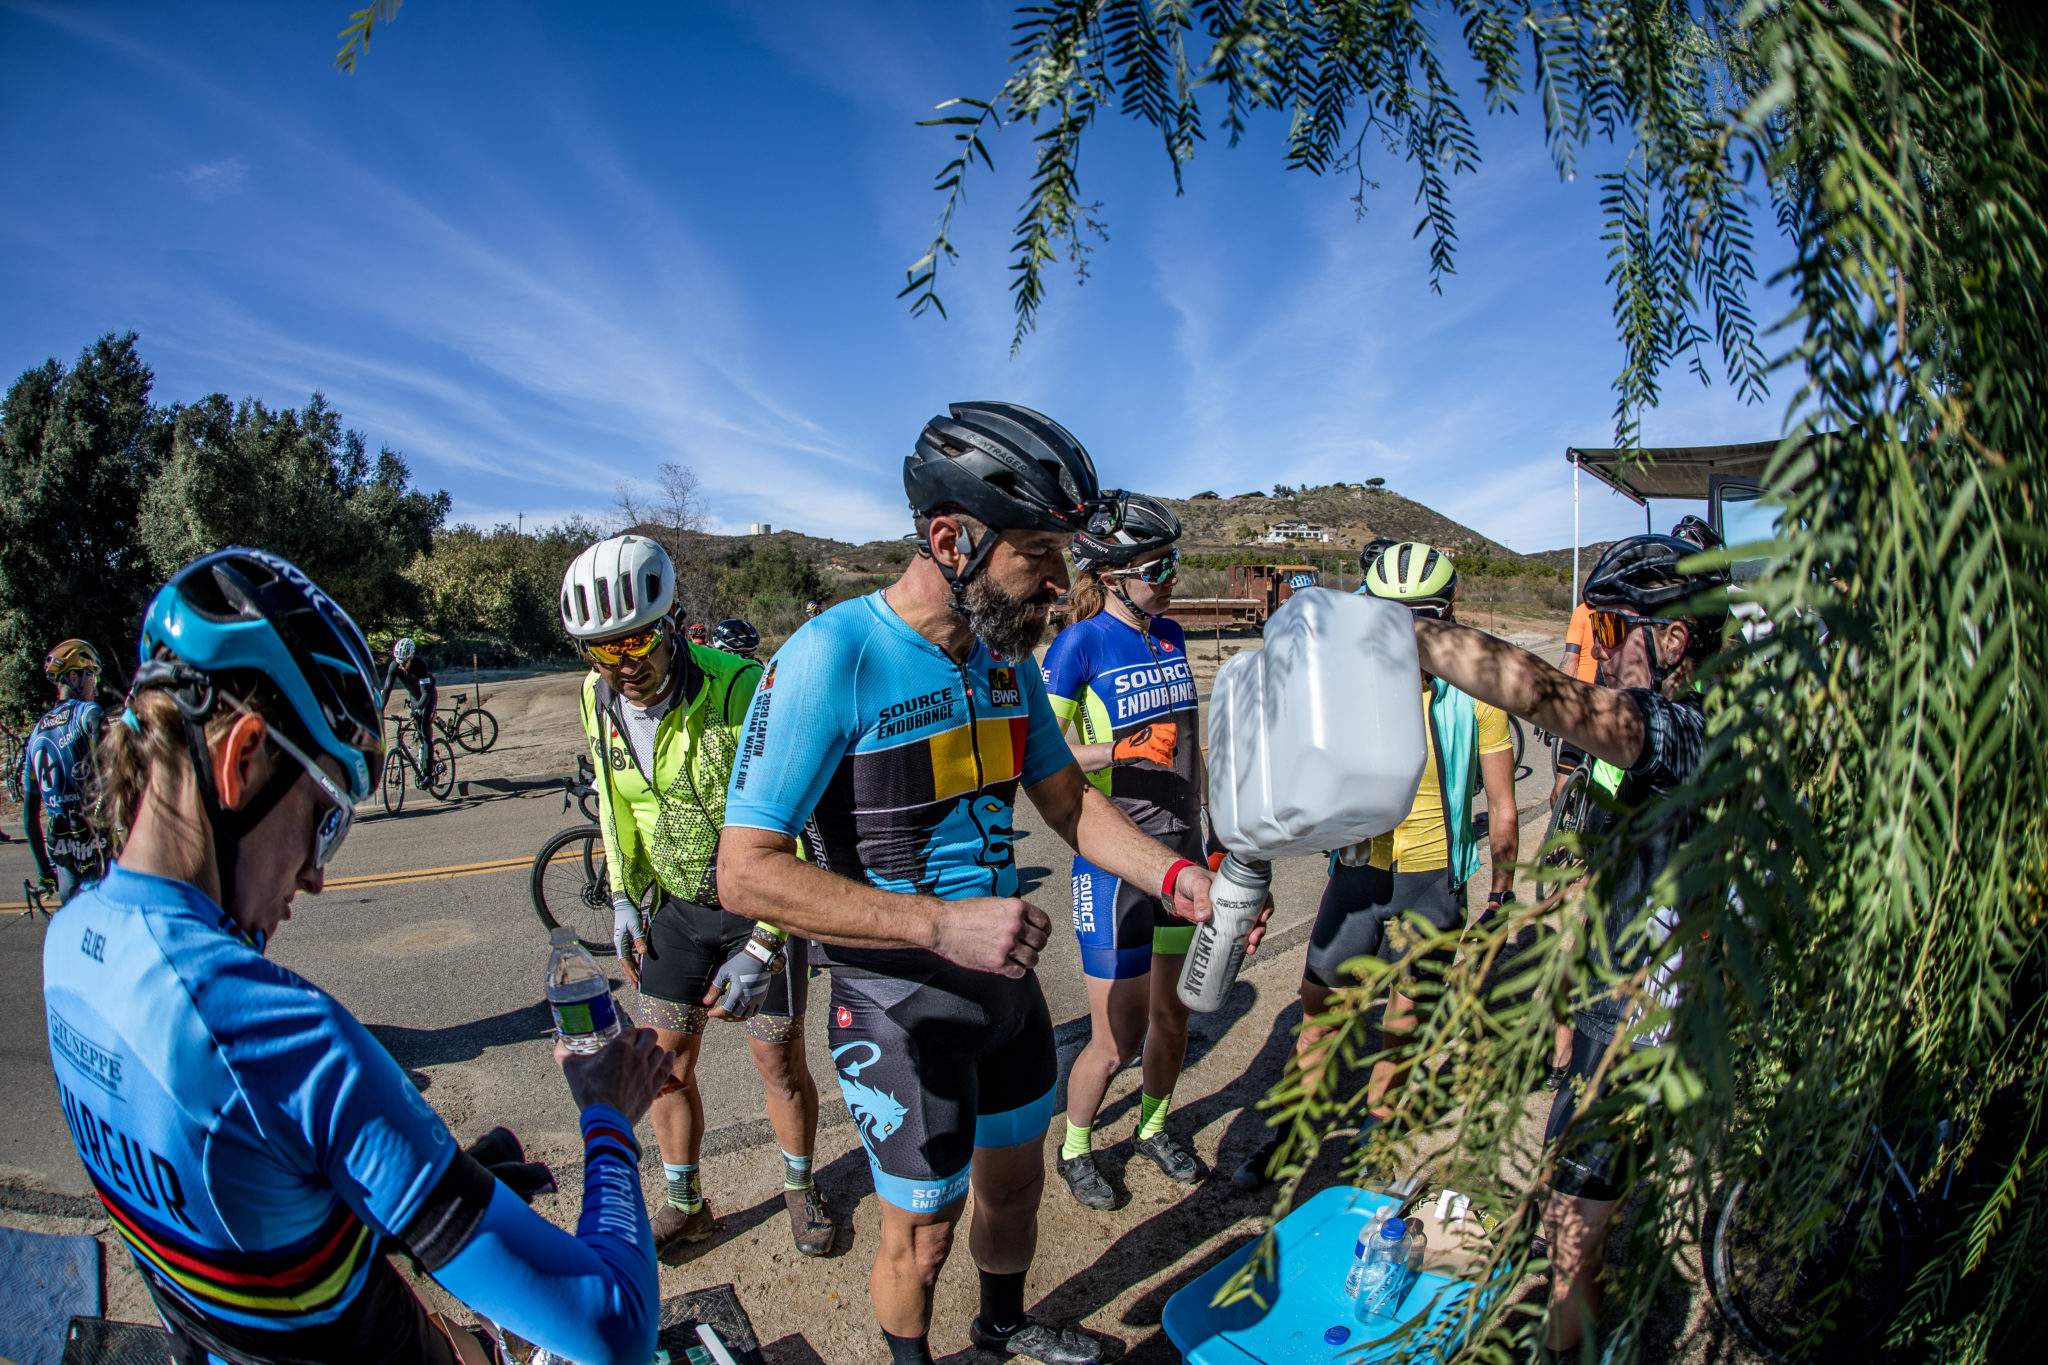 10 Tips and Tricks for Fueling for Long Gravel Races & How to Maintain